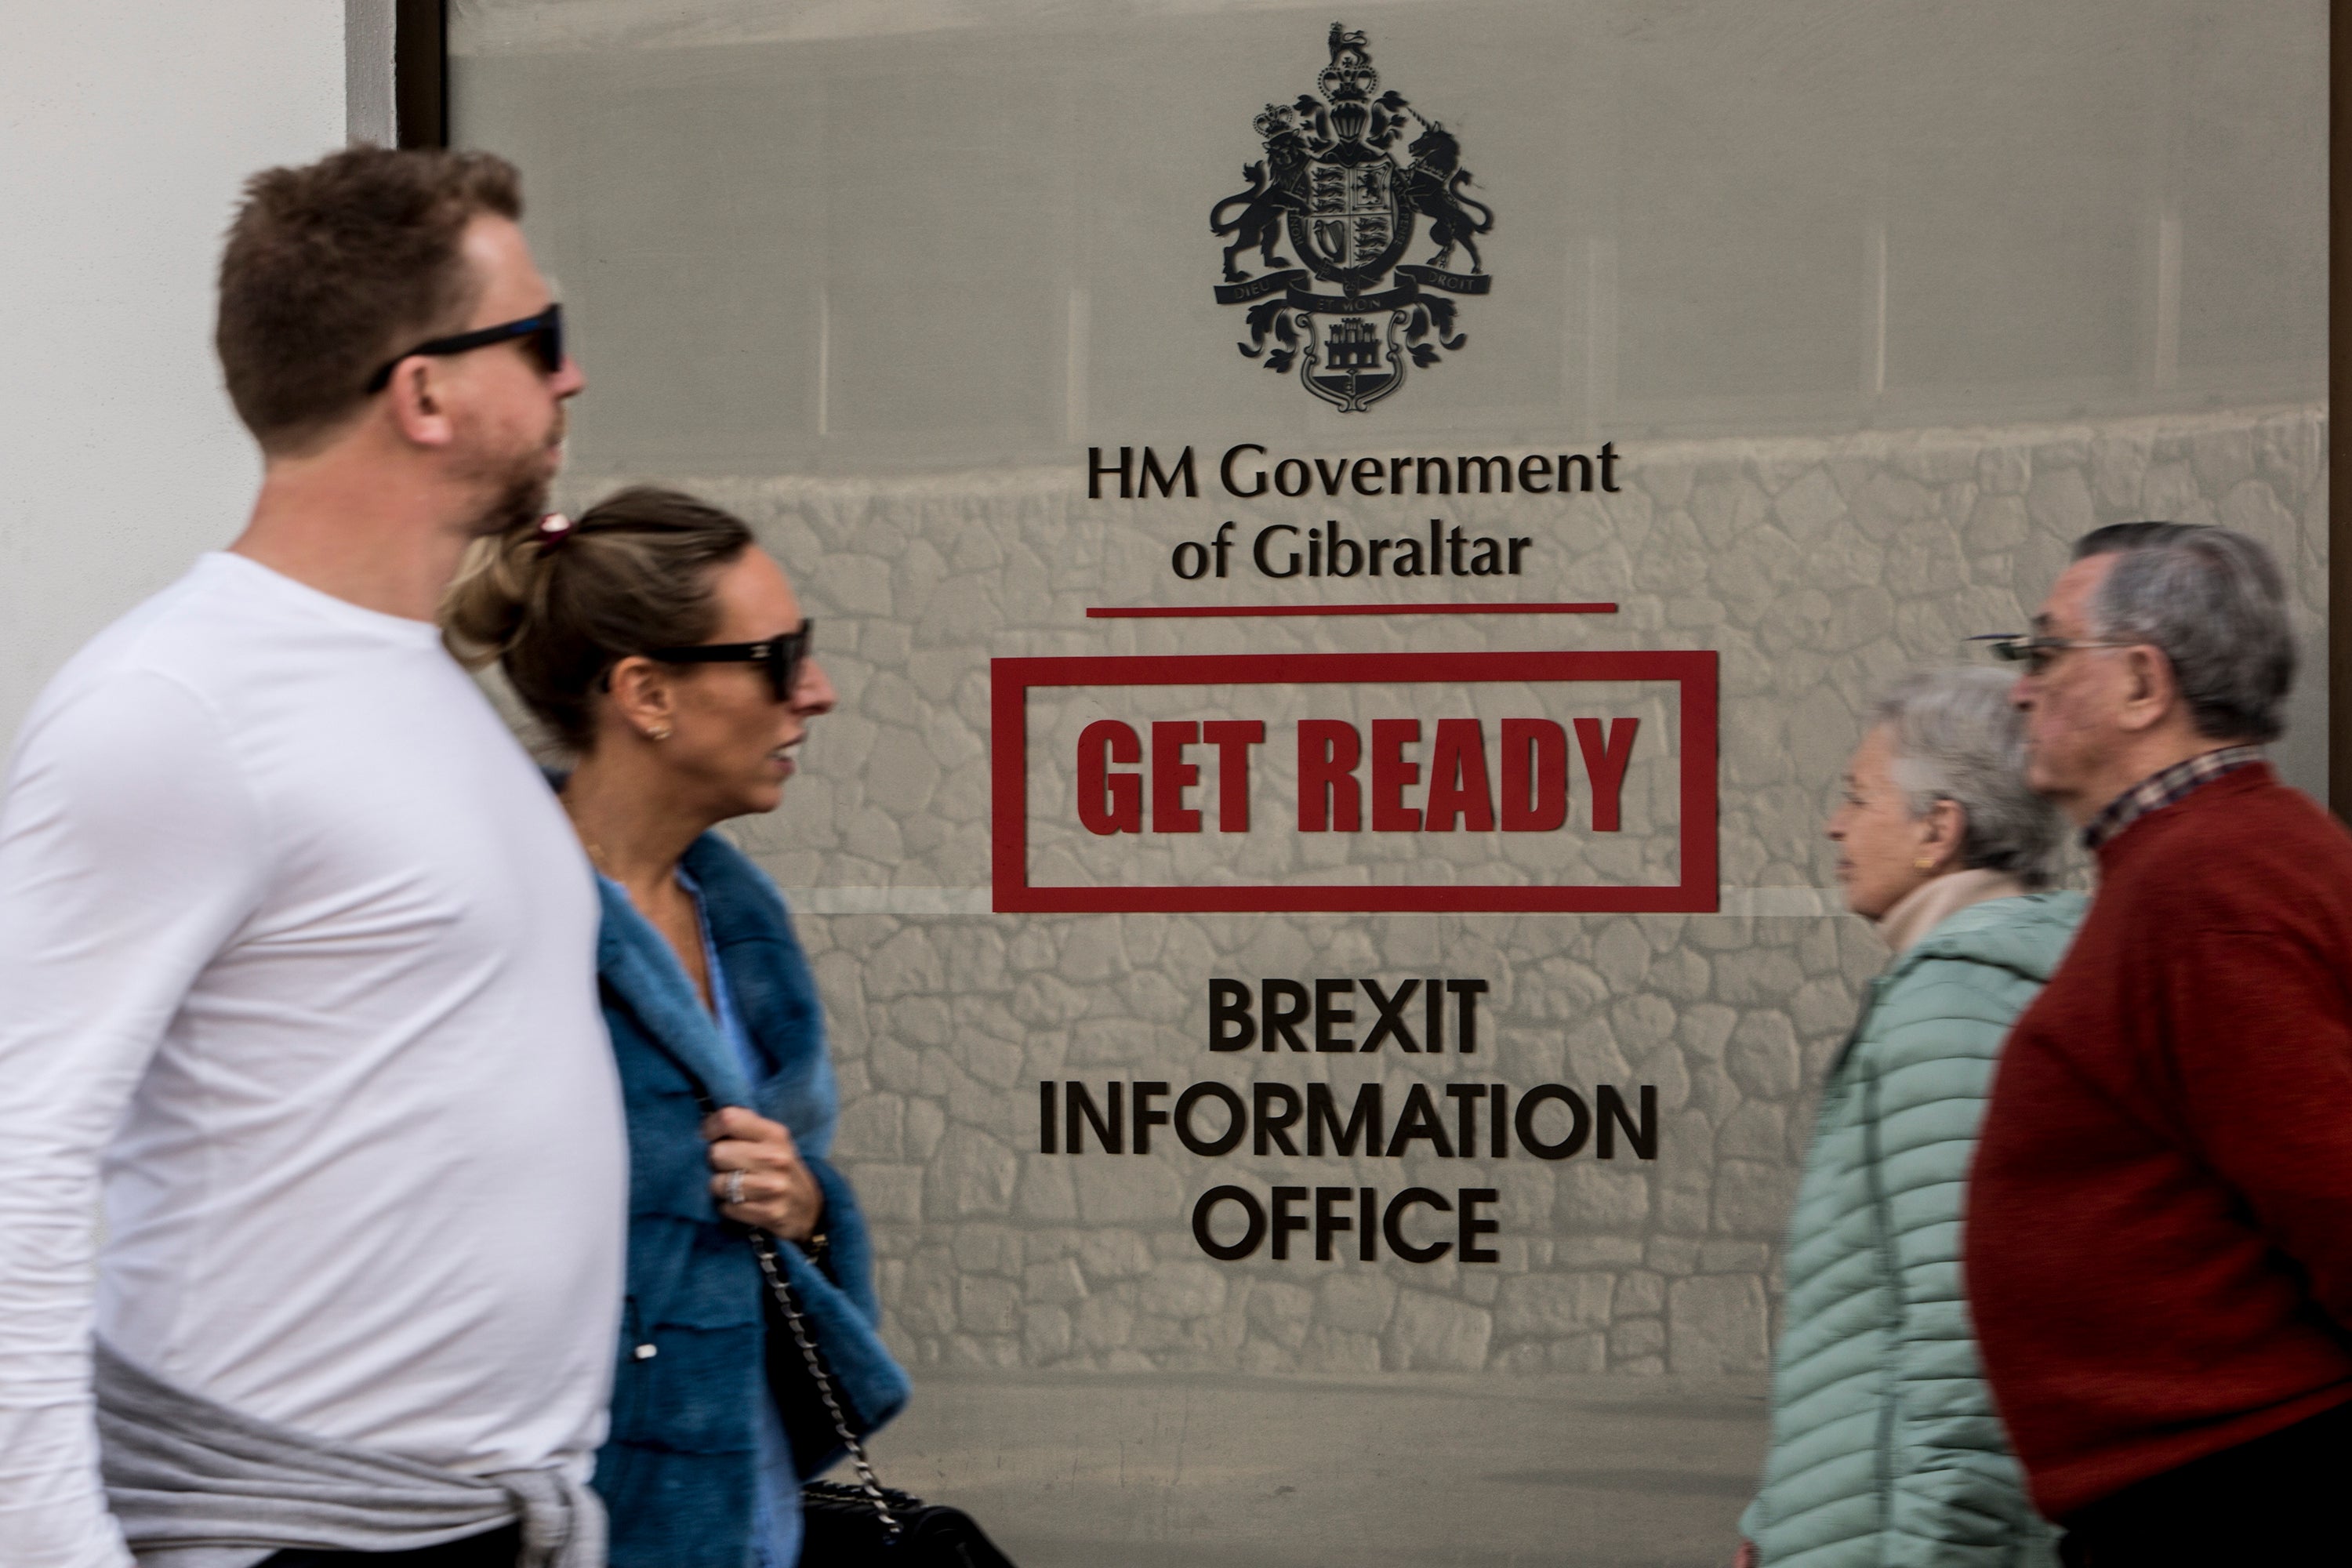 Brexit information office in the British territory of Gibraltar